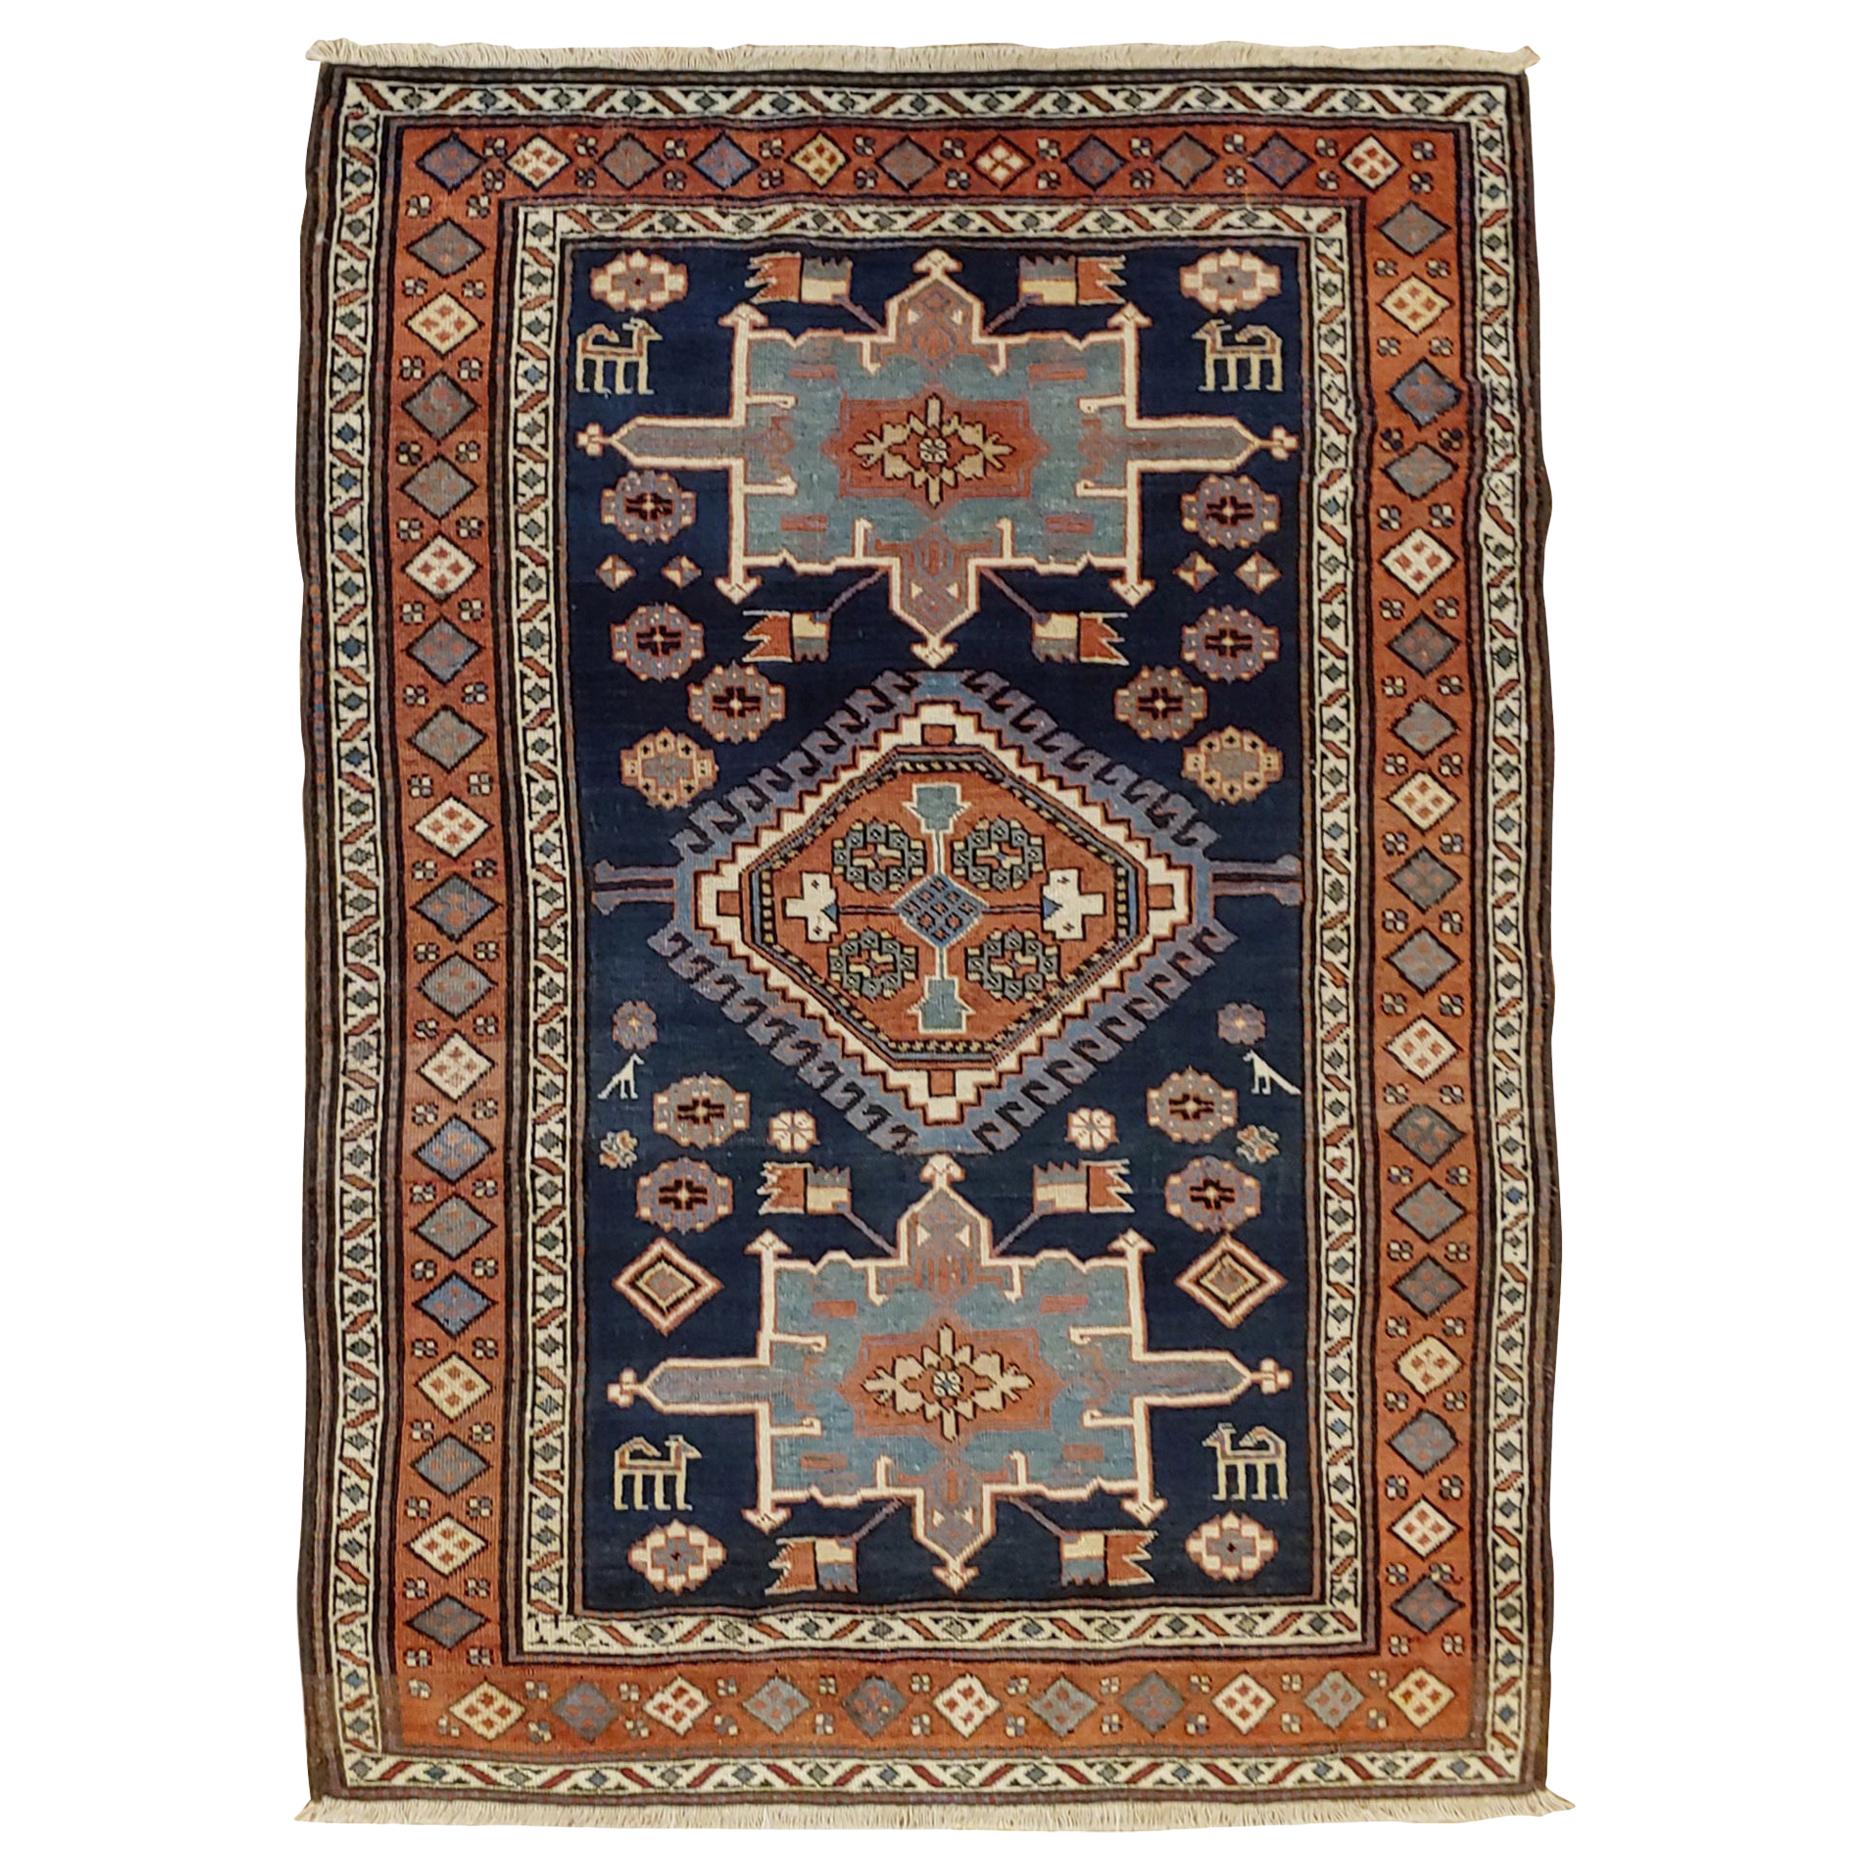 Antique Rugs 4x6 - 12 For Sale on 1stDibs